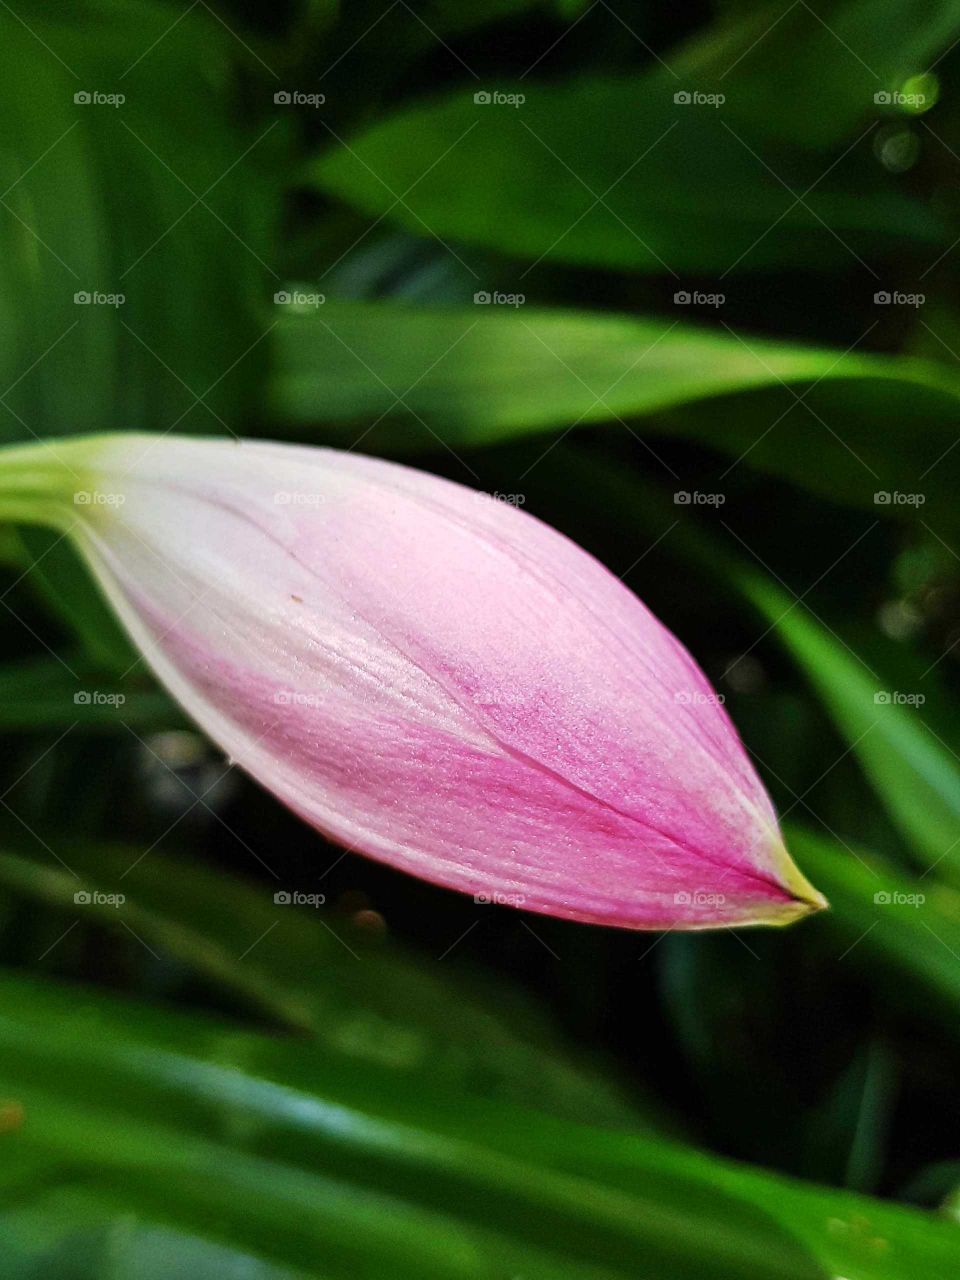 This Lilly in the botanical garden at its natural state with a lovely color of pink against white and the tip and stem light green.